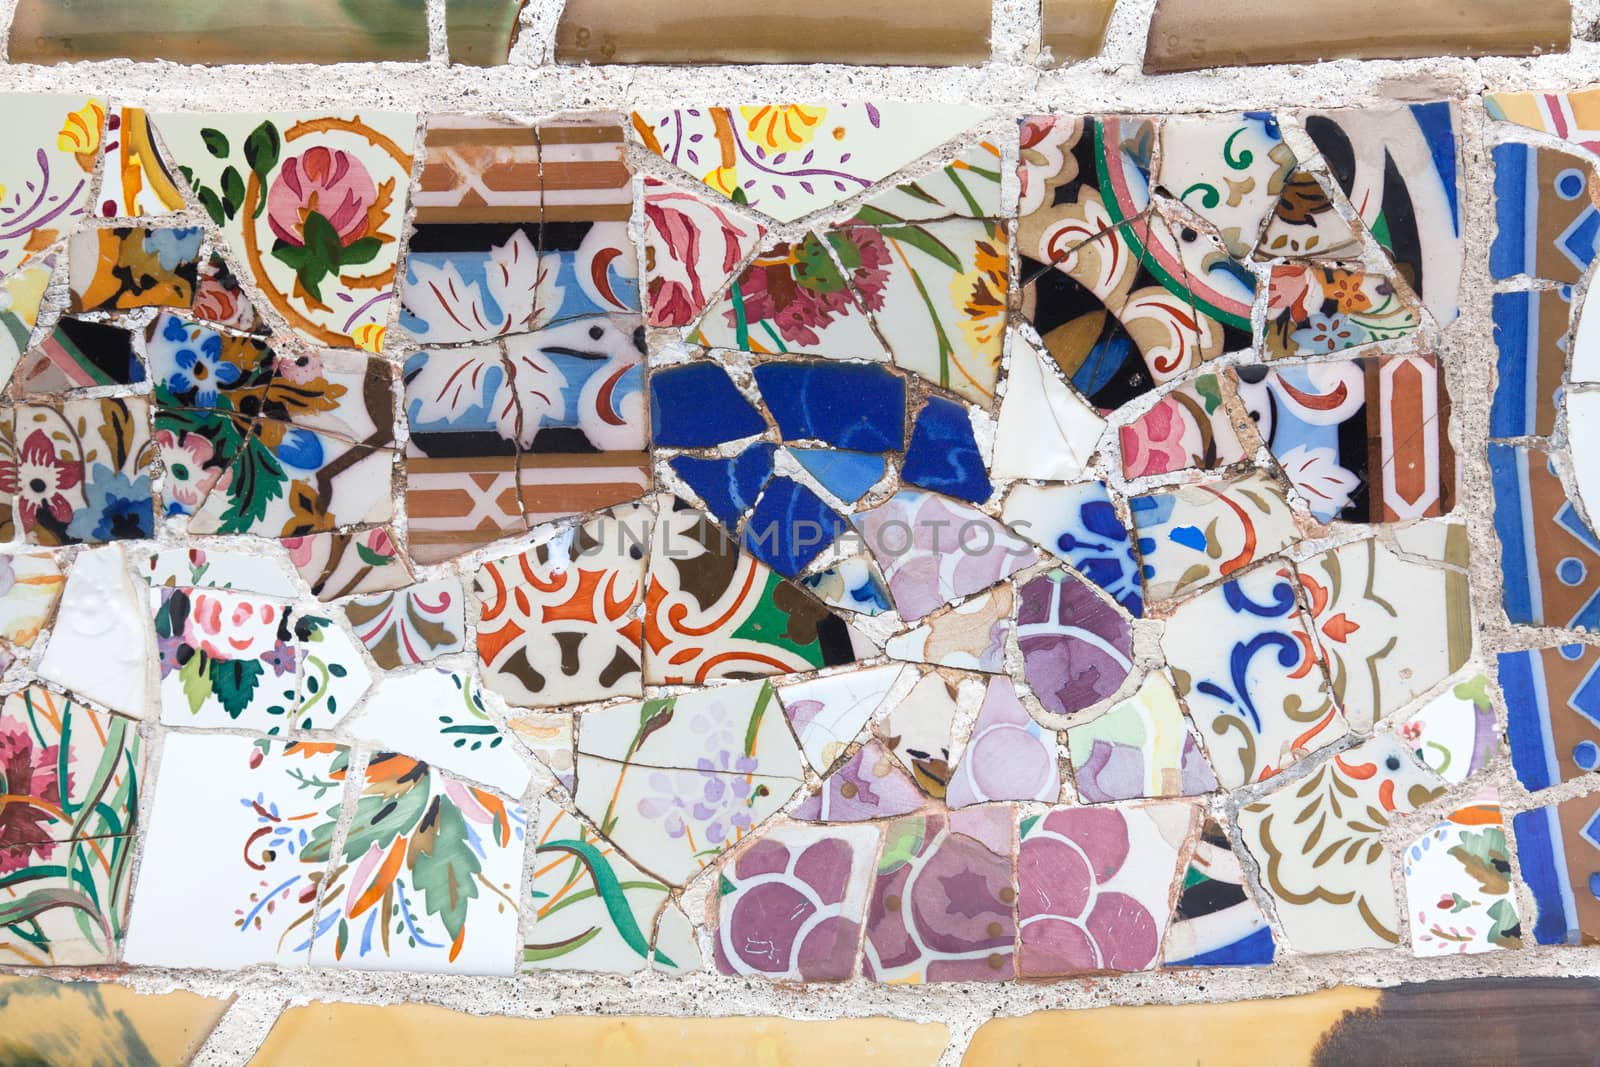 Park Guell is a garden complex with architectural elements situated on the hill of El Carmel in the Gracia district of Barcelona, Catalonia, Spain. It was designed by the Catalan architect Antoni Gaudi and built in the years 1900 to 1914. It is part of the UNESCO World Heritage Site "Works of Antoni Gaudi".